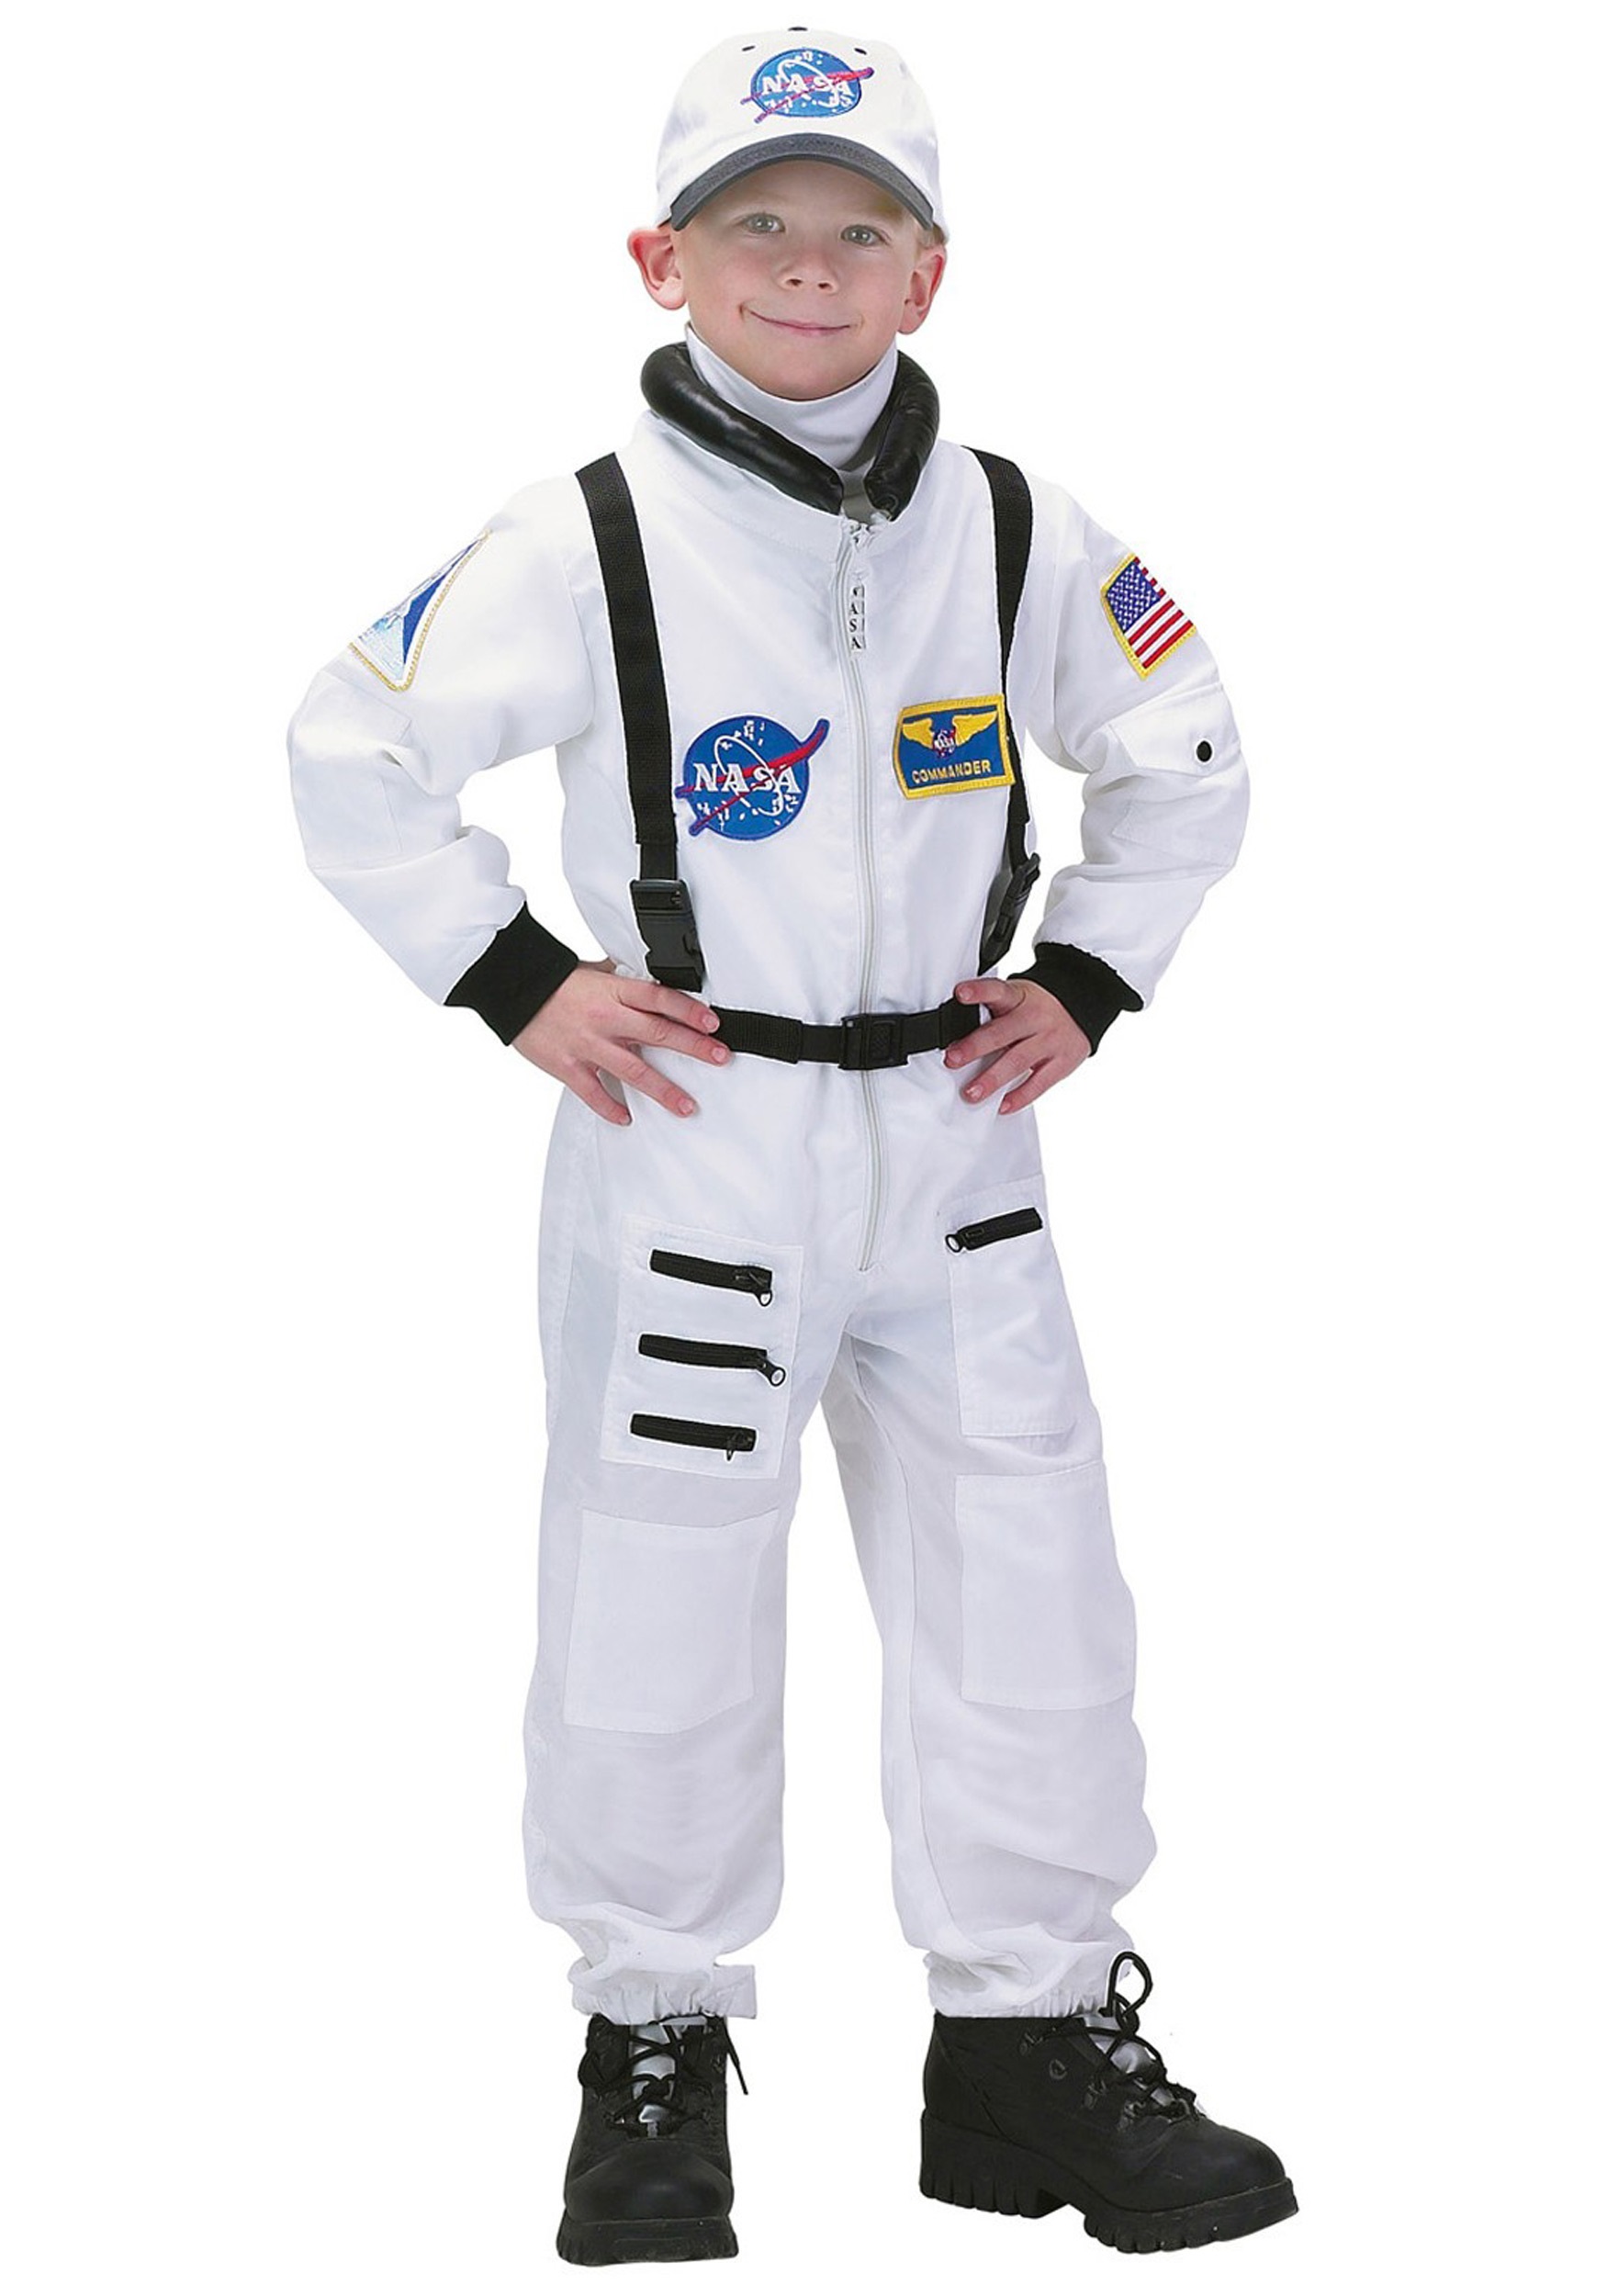 NASA ASTRONAUT SPACESUIT 2-Sided KIDS T-Shirt Easy Halloween Costume S-XL 